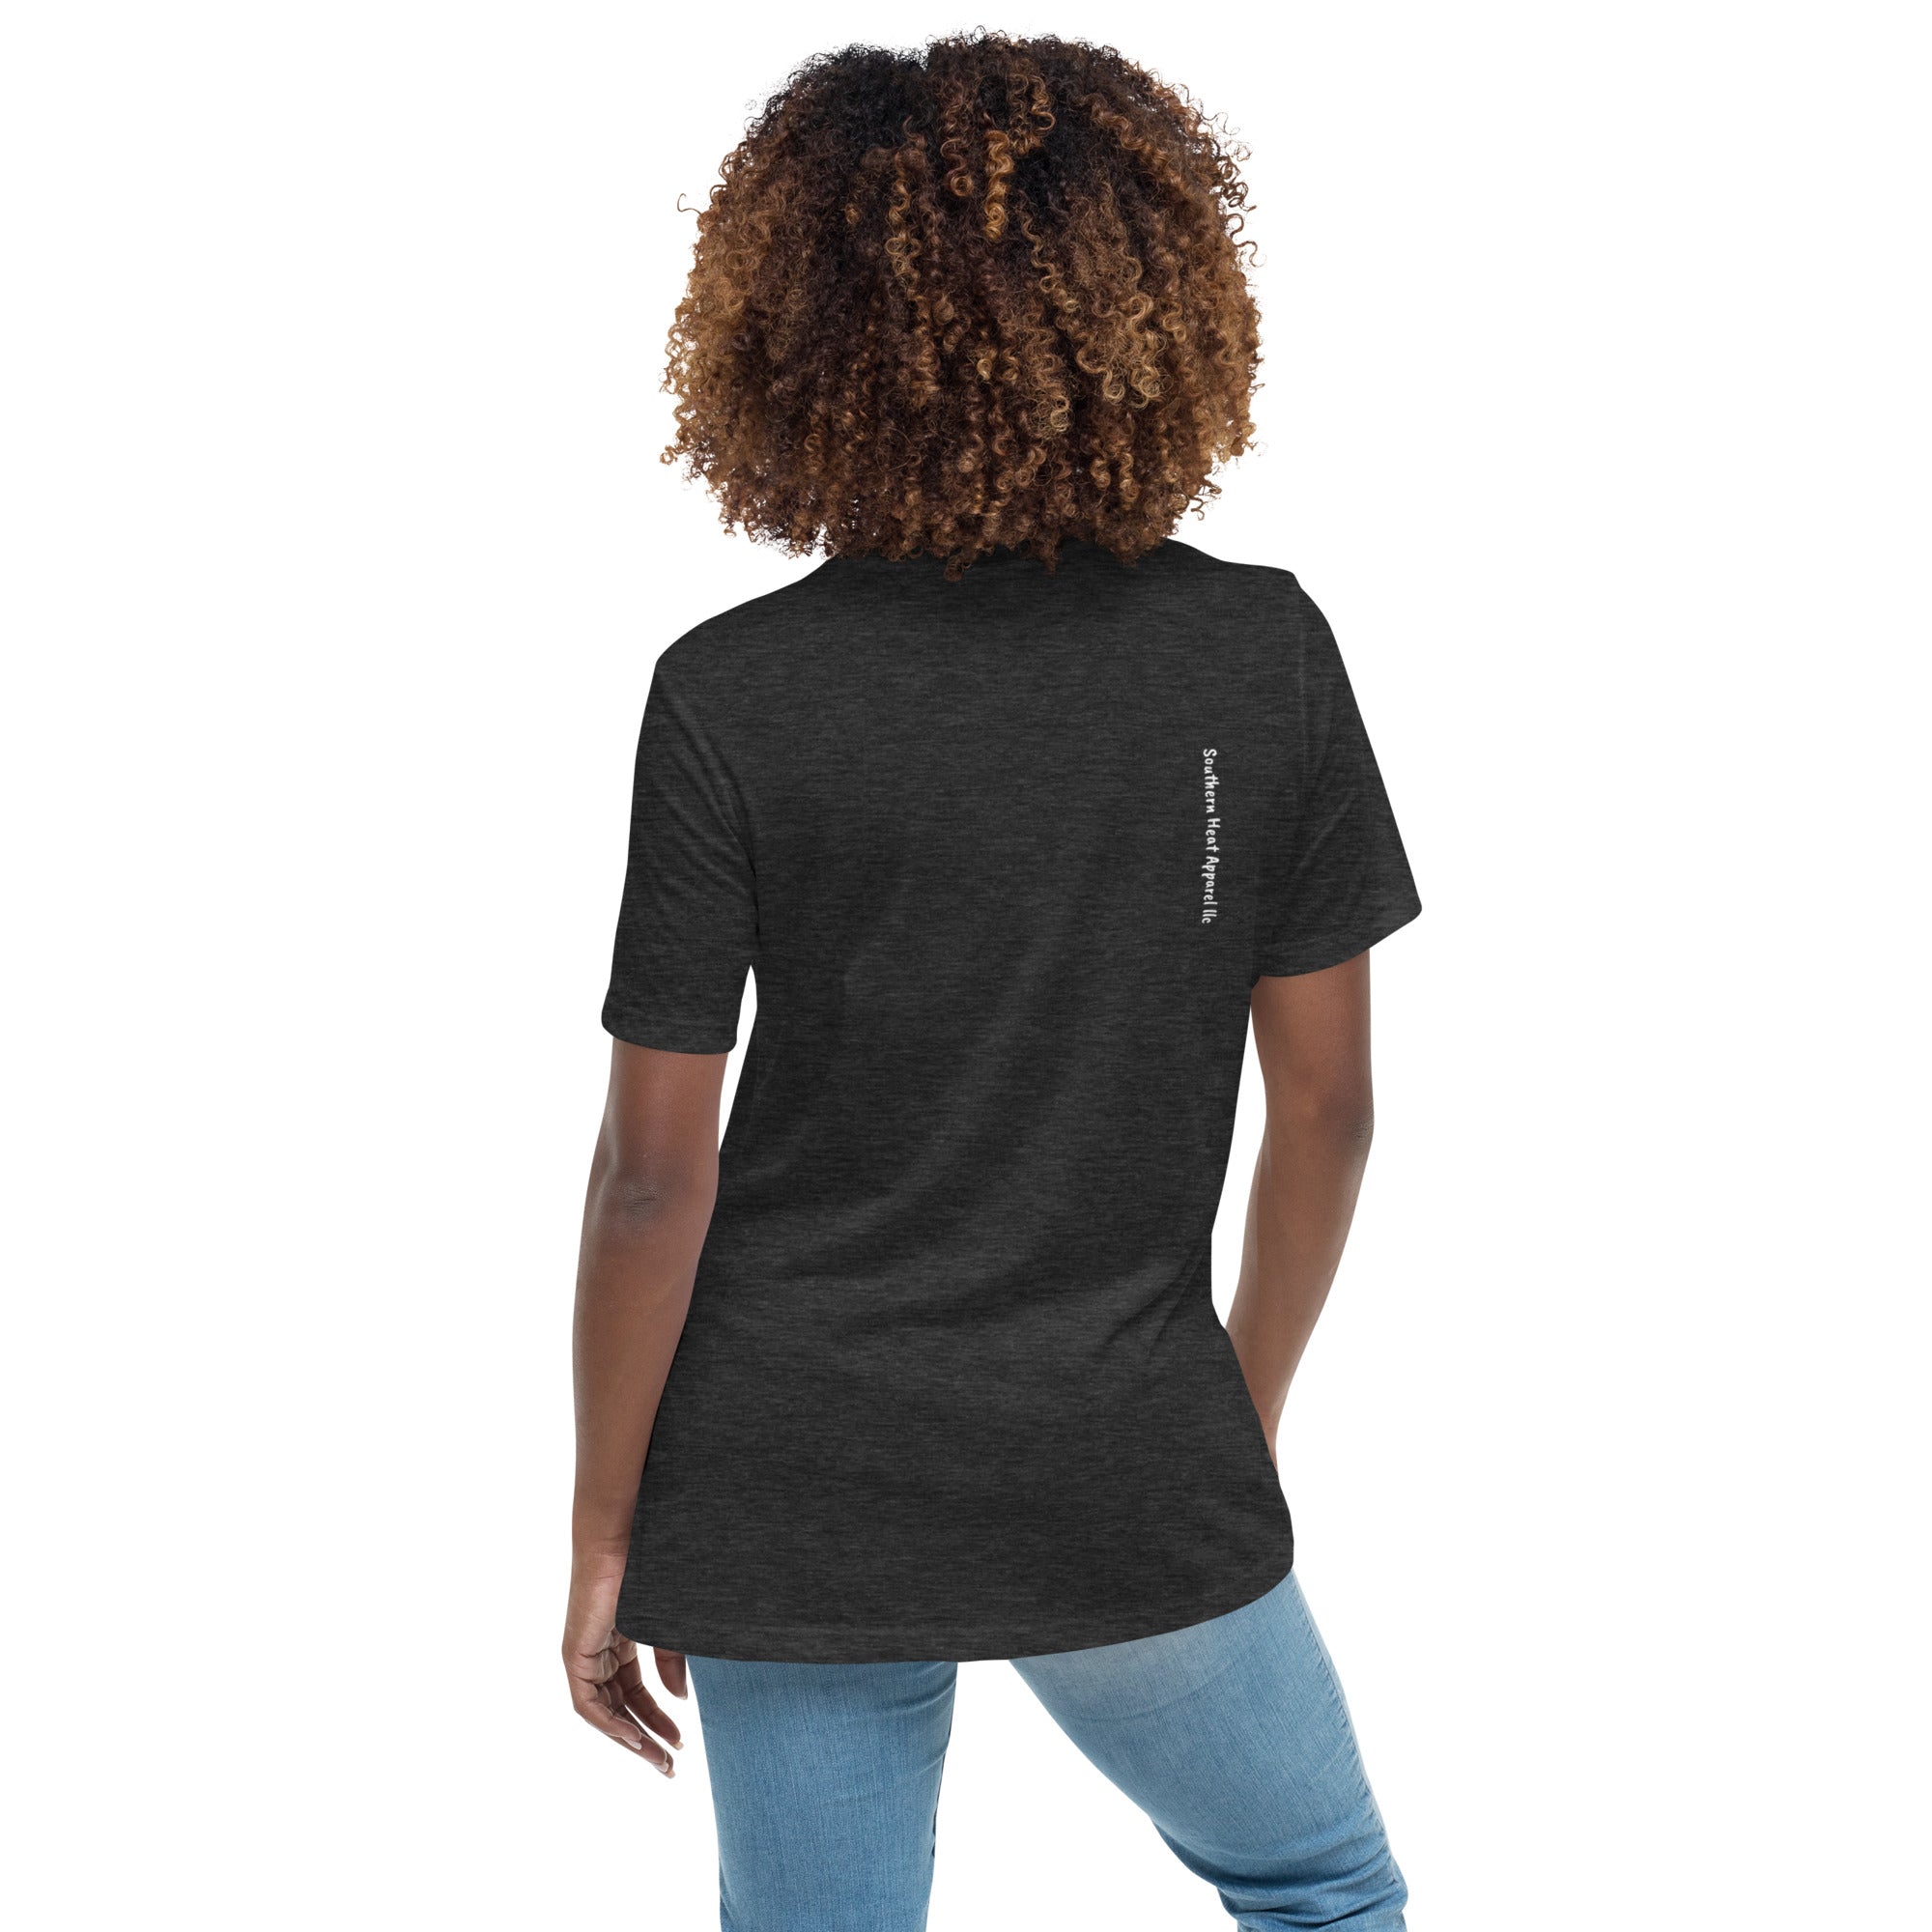 Just Country-Women's Relaxed T-Shirt